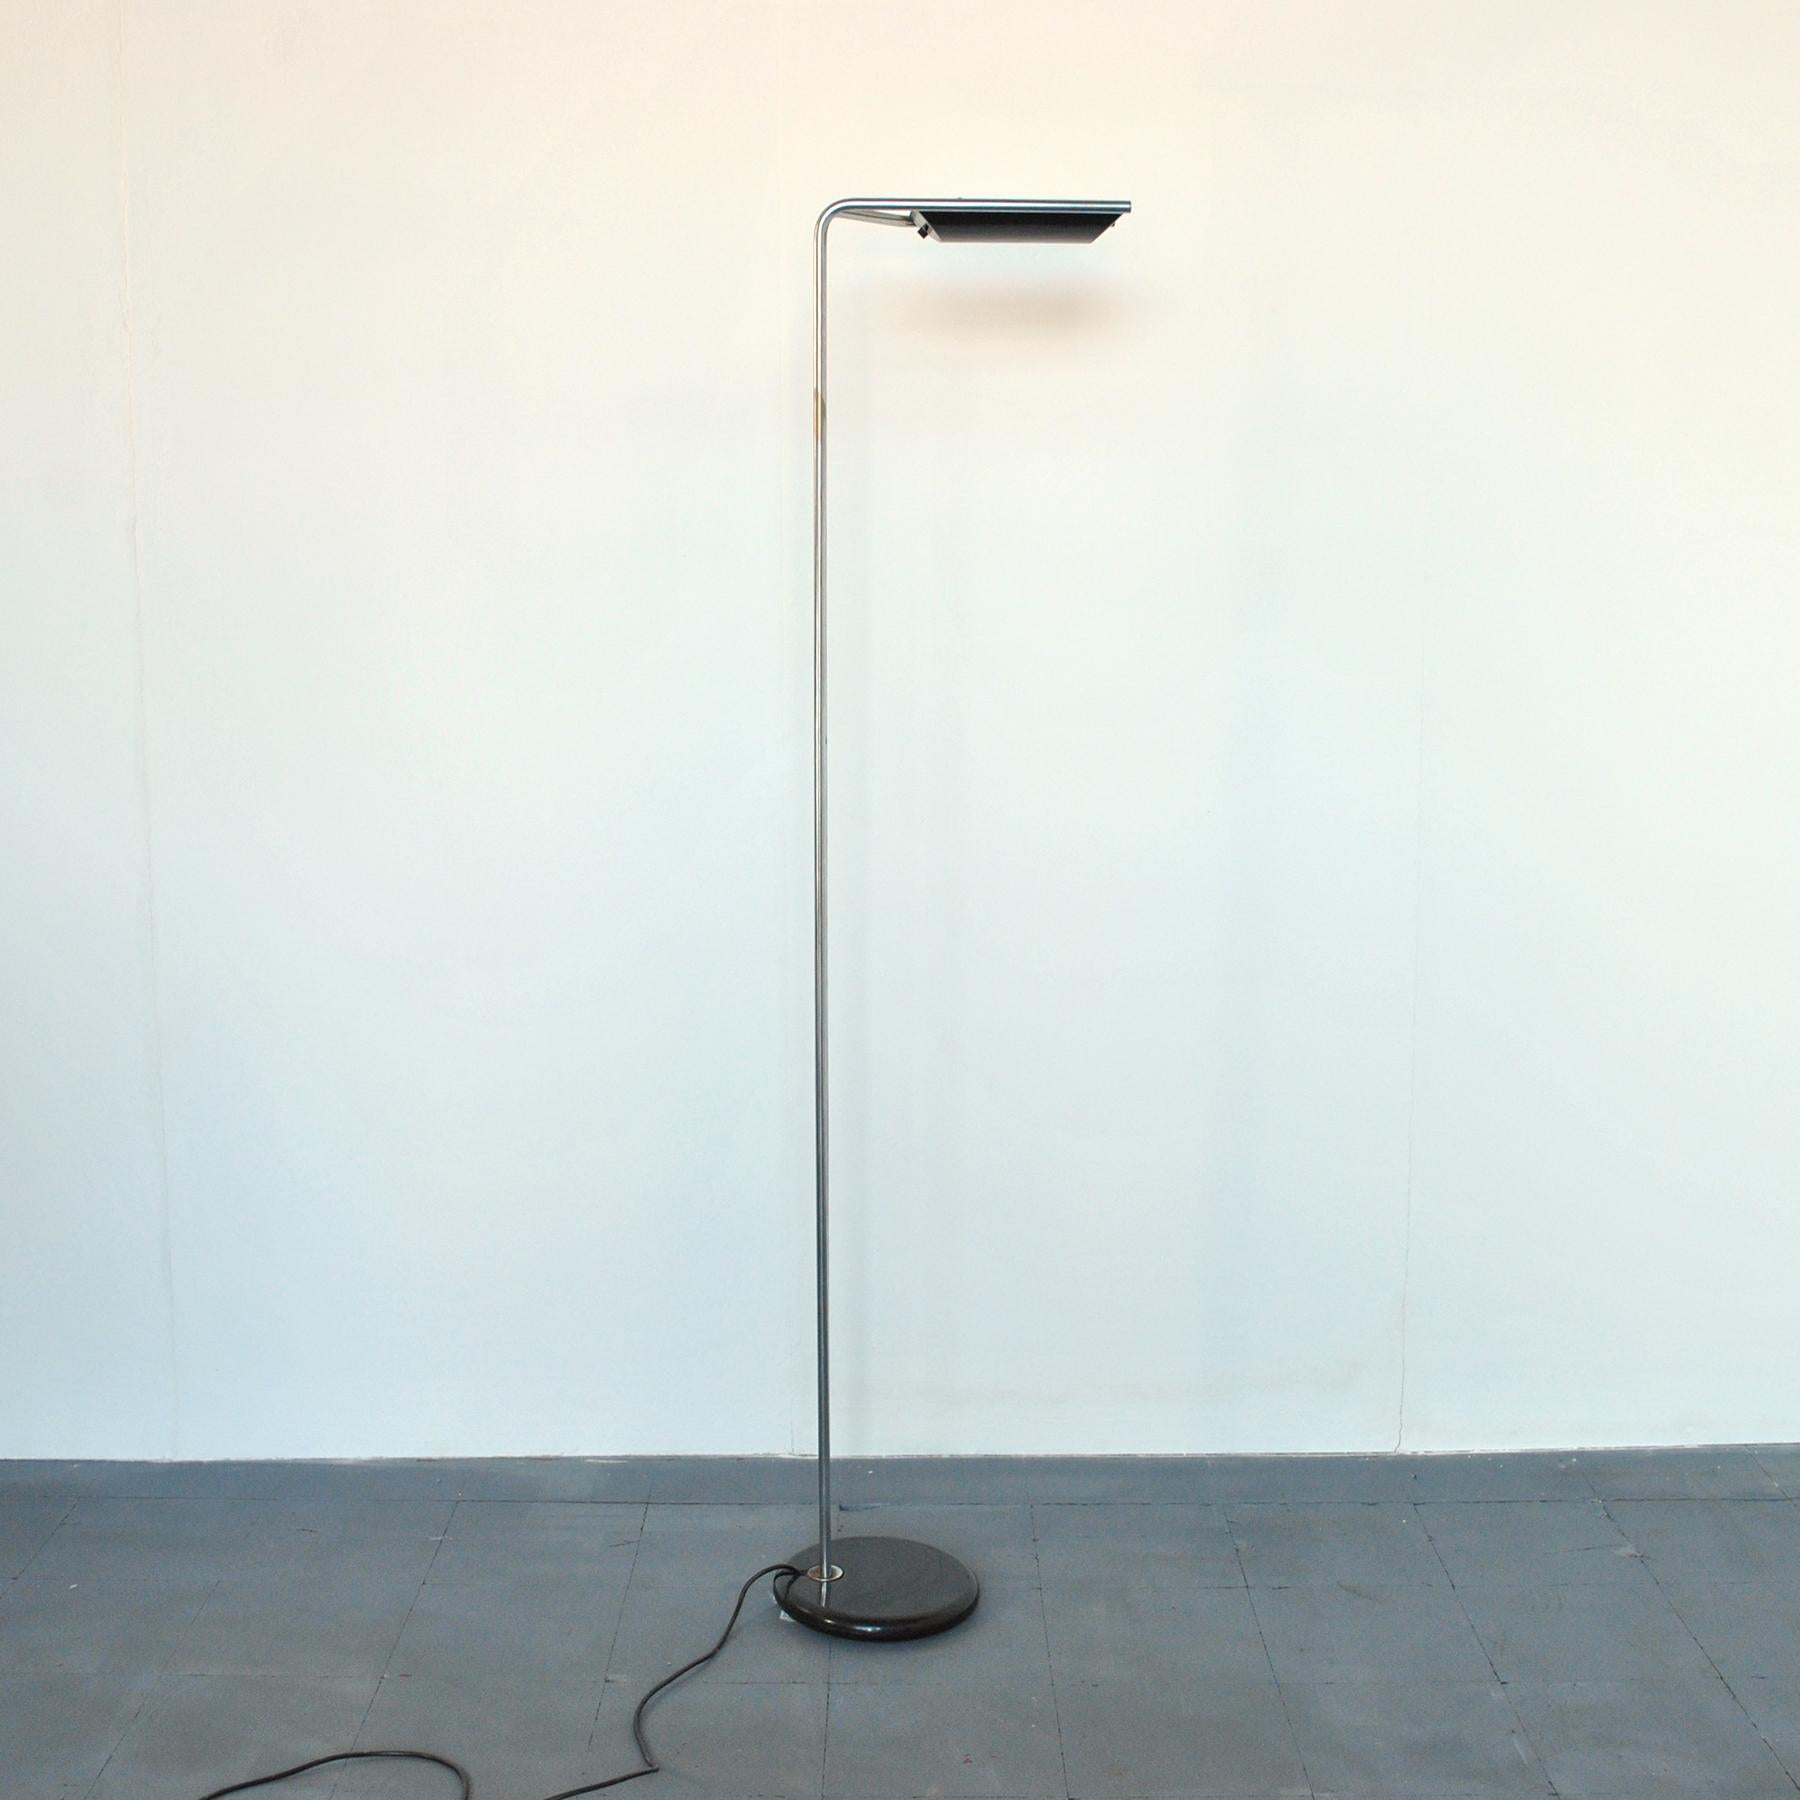 Italian midcentury floor lamp by Bruno Gecchelin design for Guzzini Italia, 1970s.
Bruno Gecchelin was born in Milan in 1939. In 1962 he developed studies and research on gas cookers and compact refrigerators for Indesit and began designing